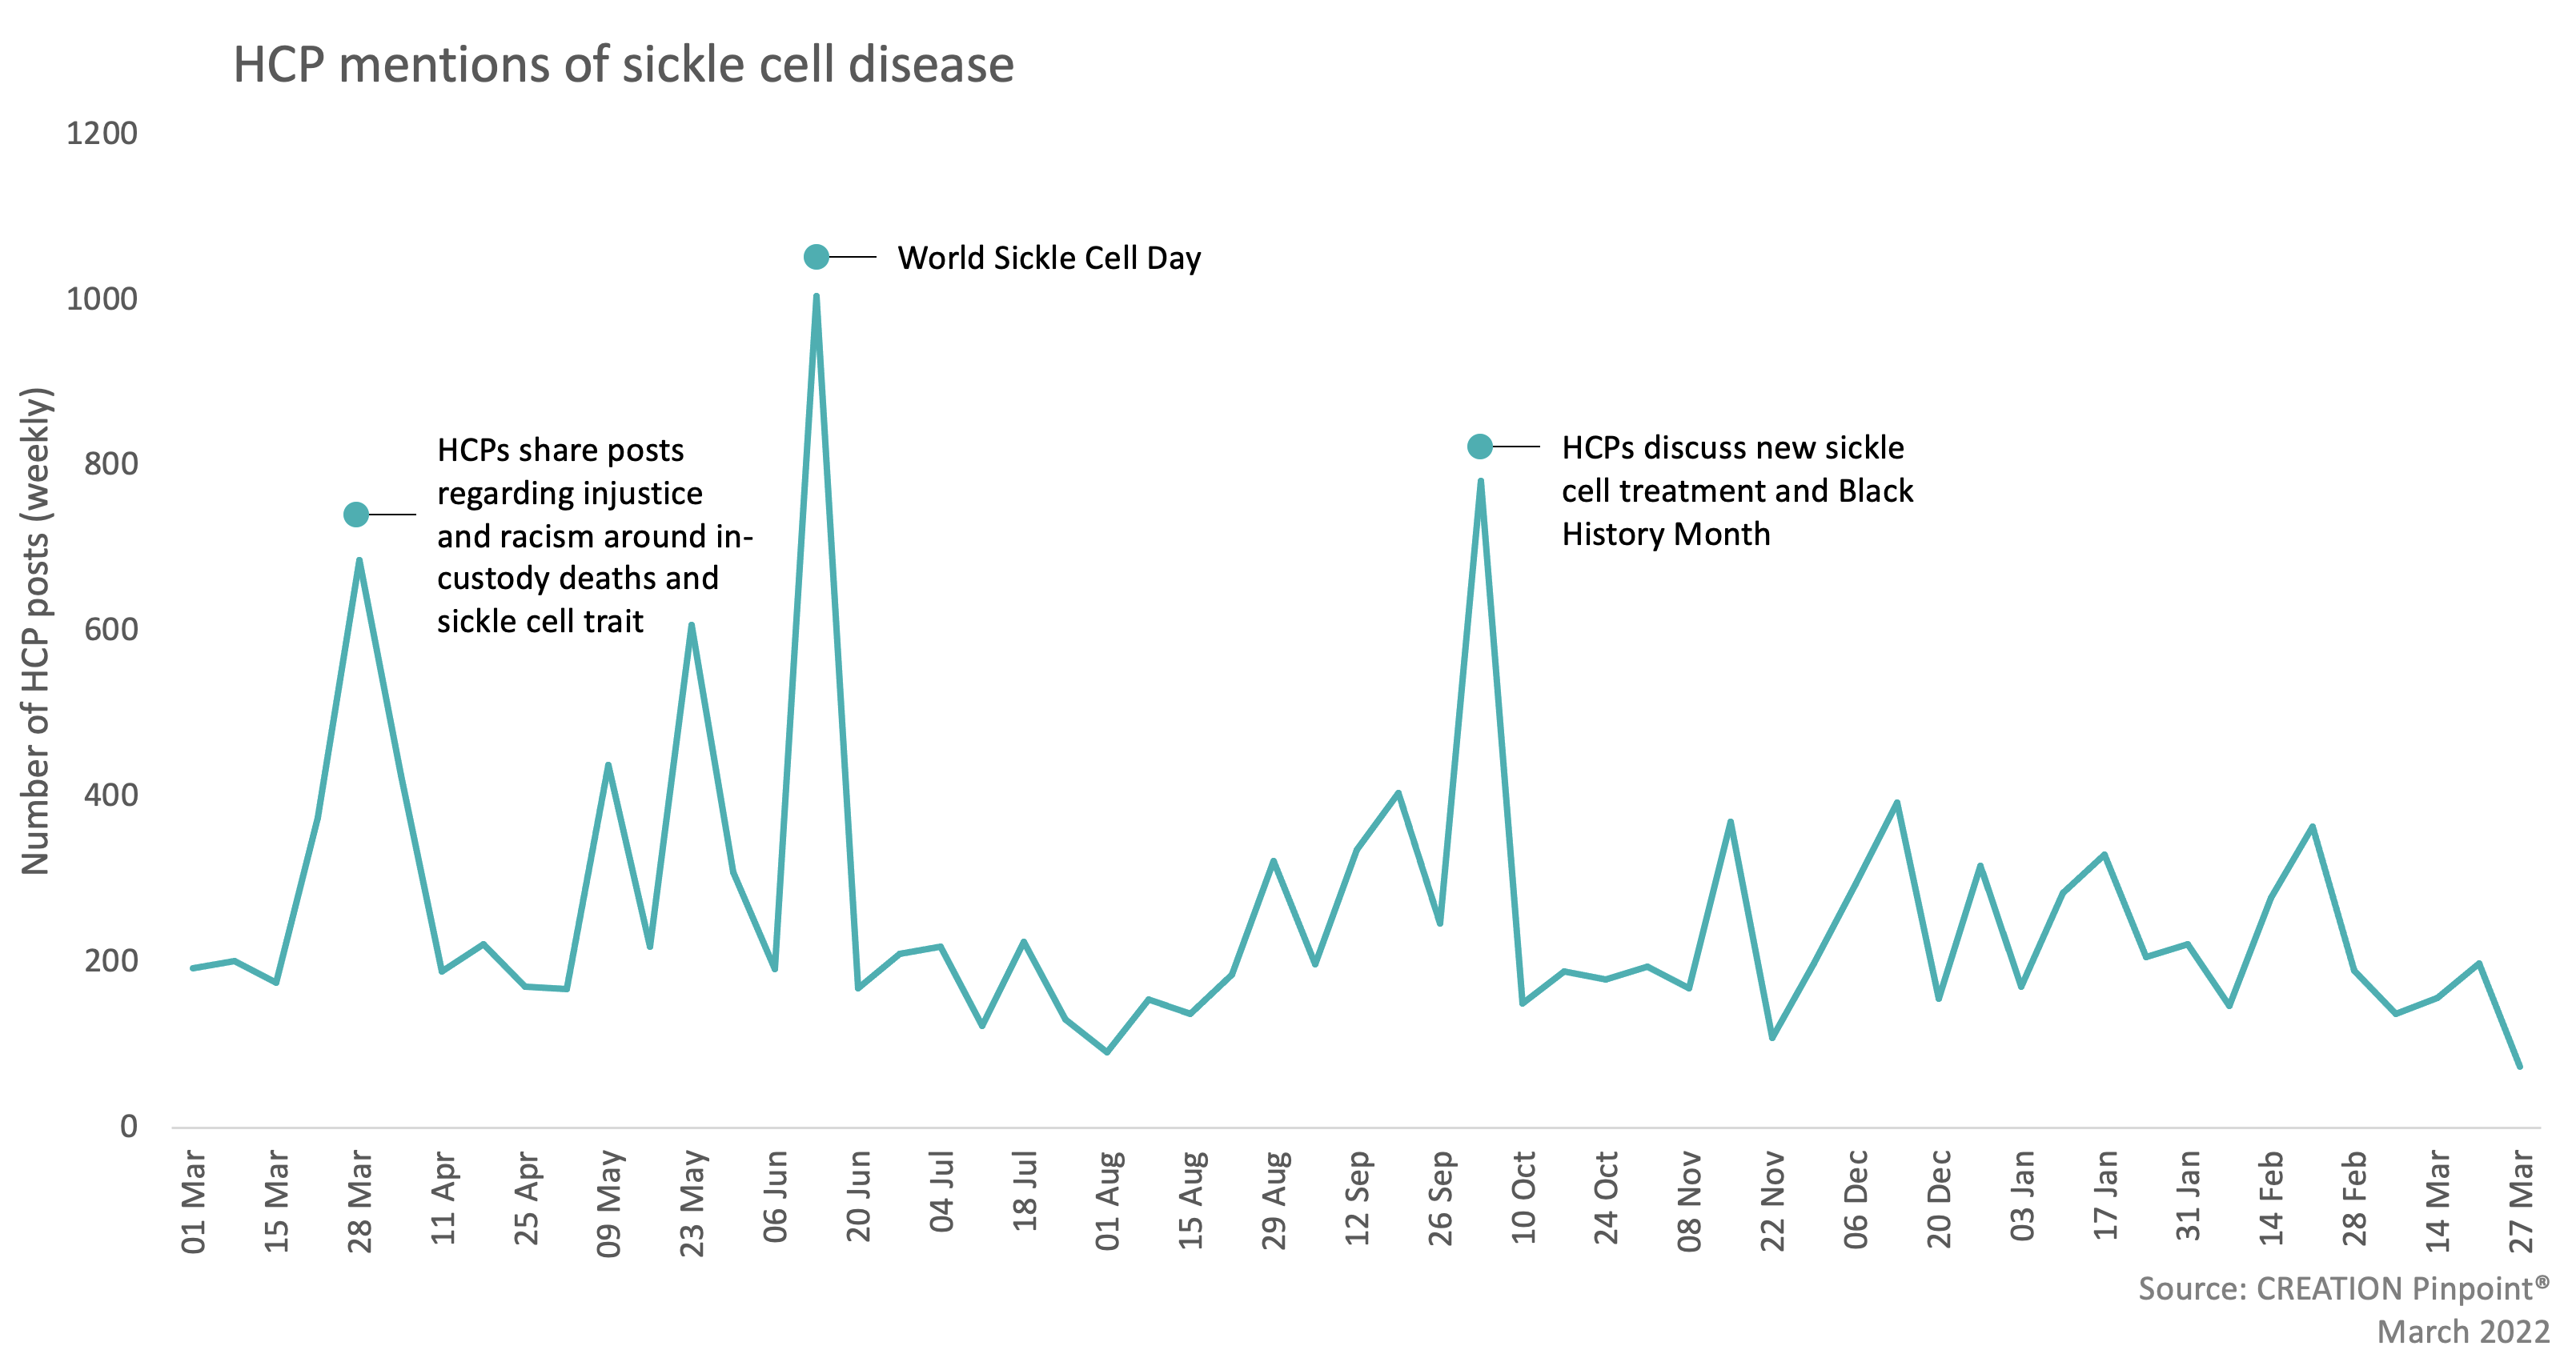 Graphs of HCP mentions of sickle cell disease